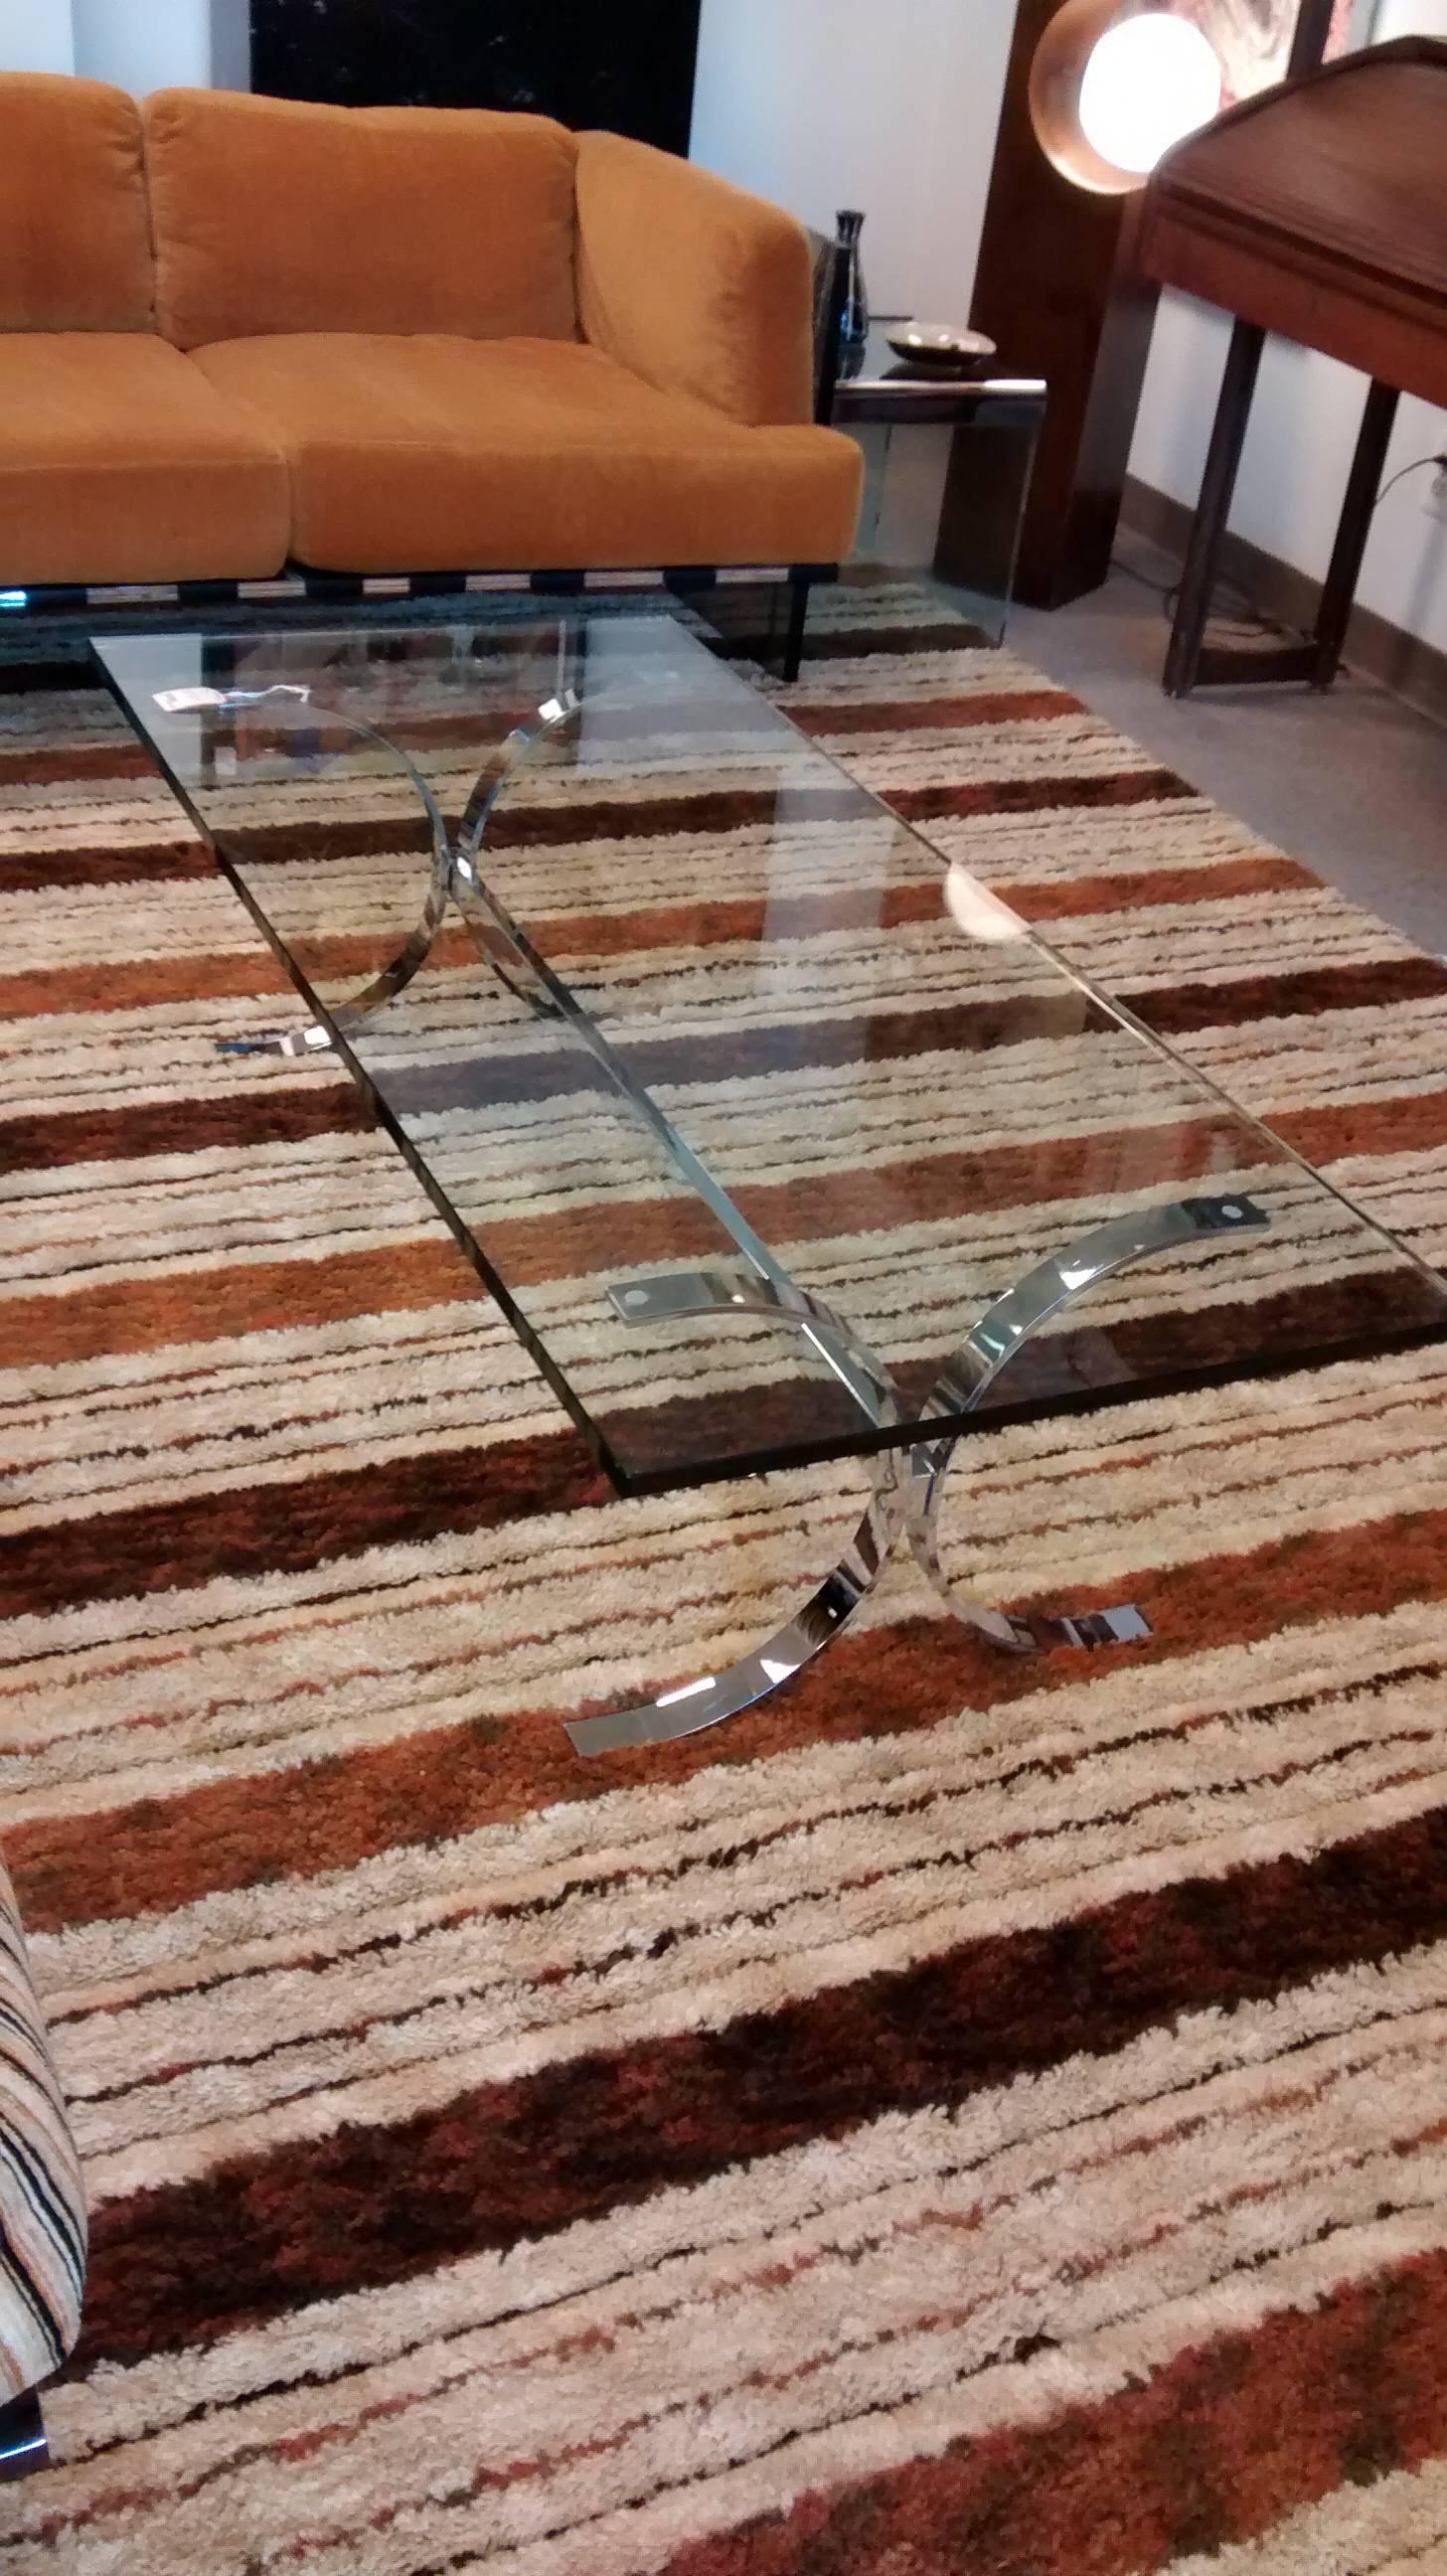 Superb example of a Milo Baughman coffee table. Dating to about 1970, and just retrieved from its original location. 

Curved X-form chrome over steel base and stretcher, with its original 3/4